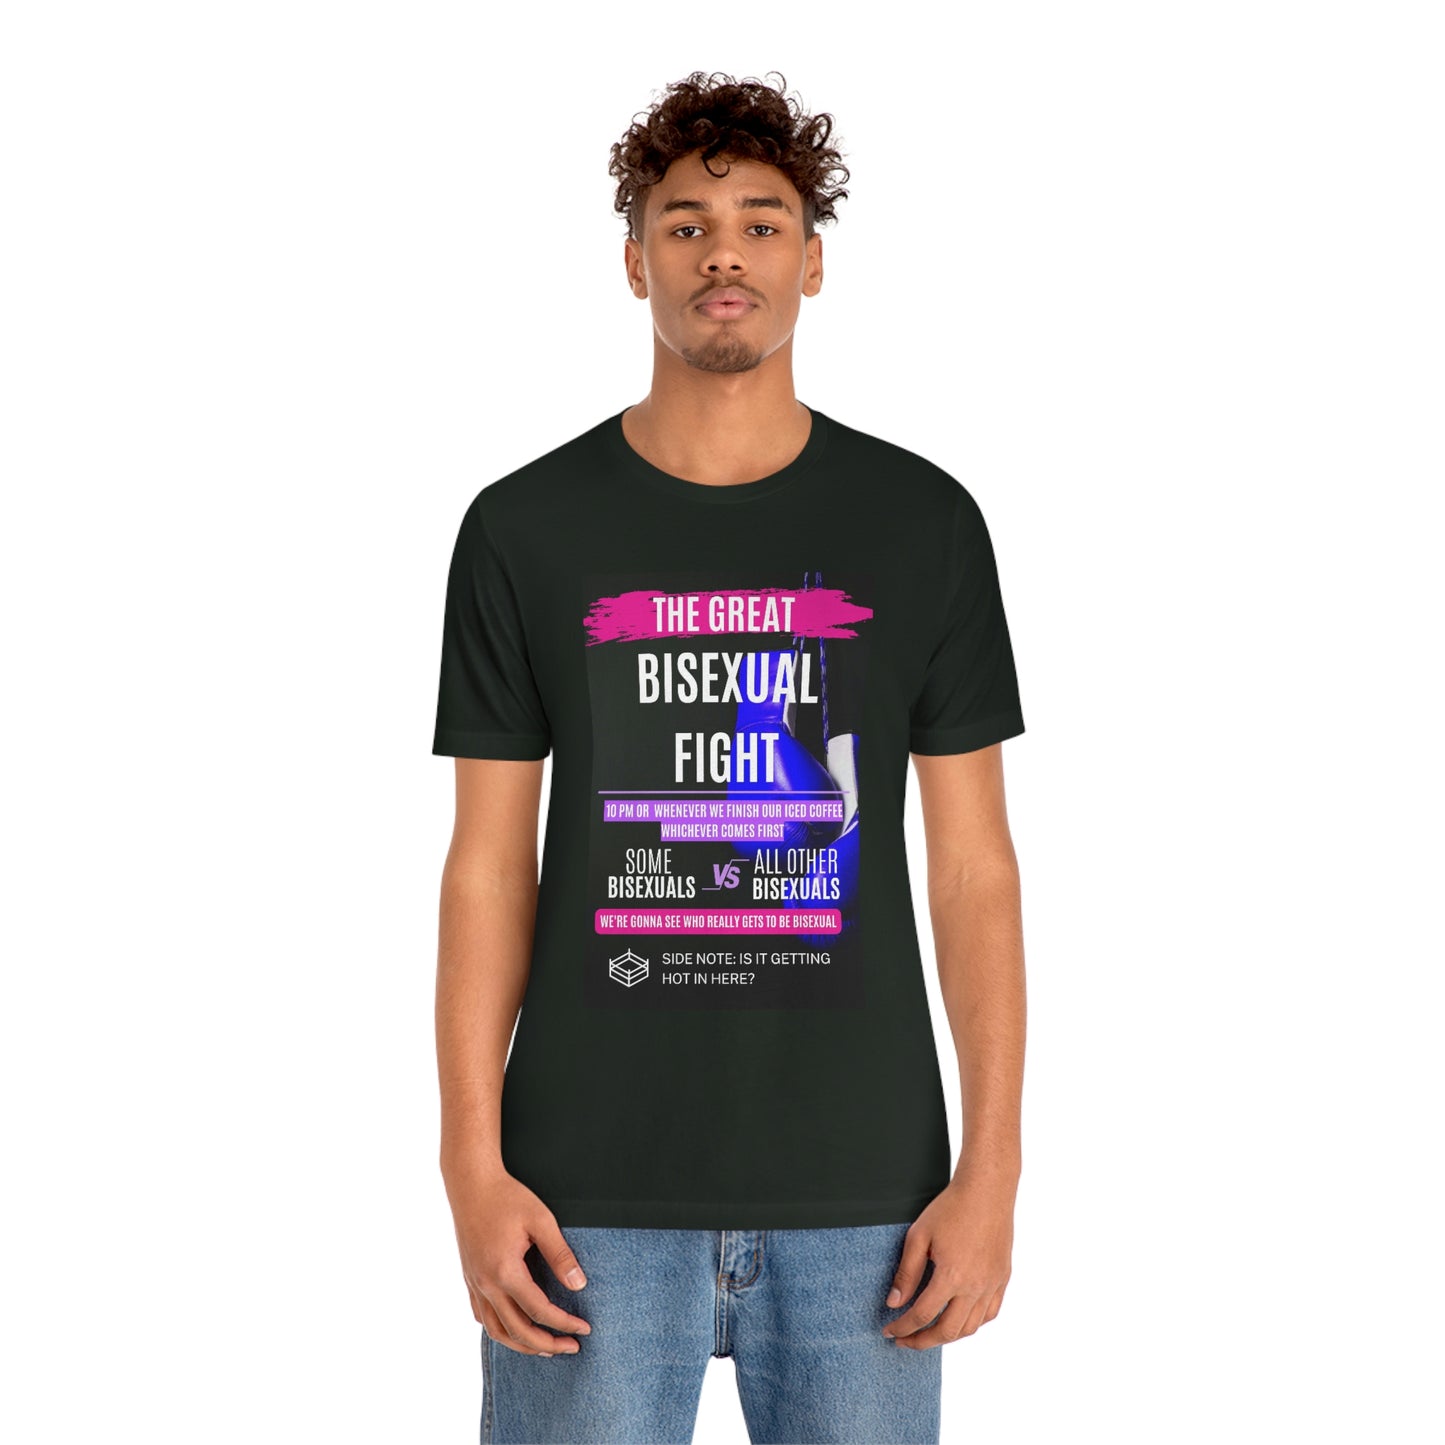 The Great Bisexual Fight Shirt